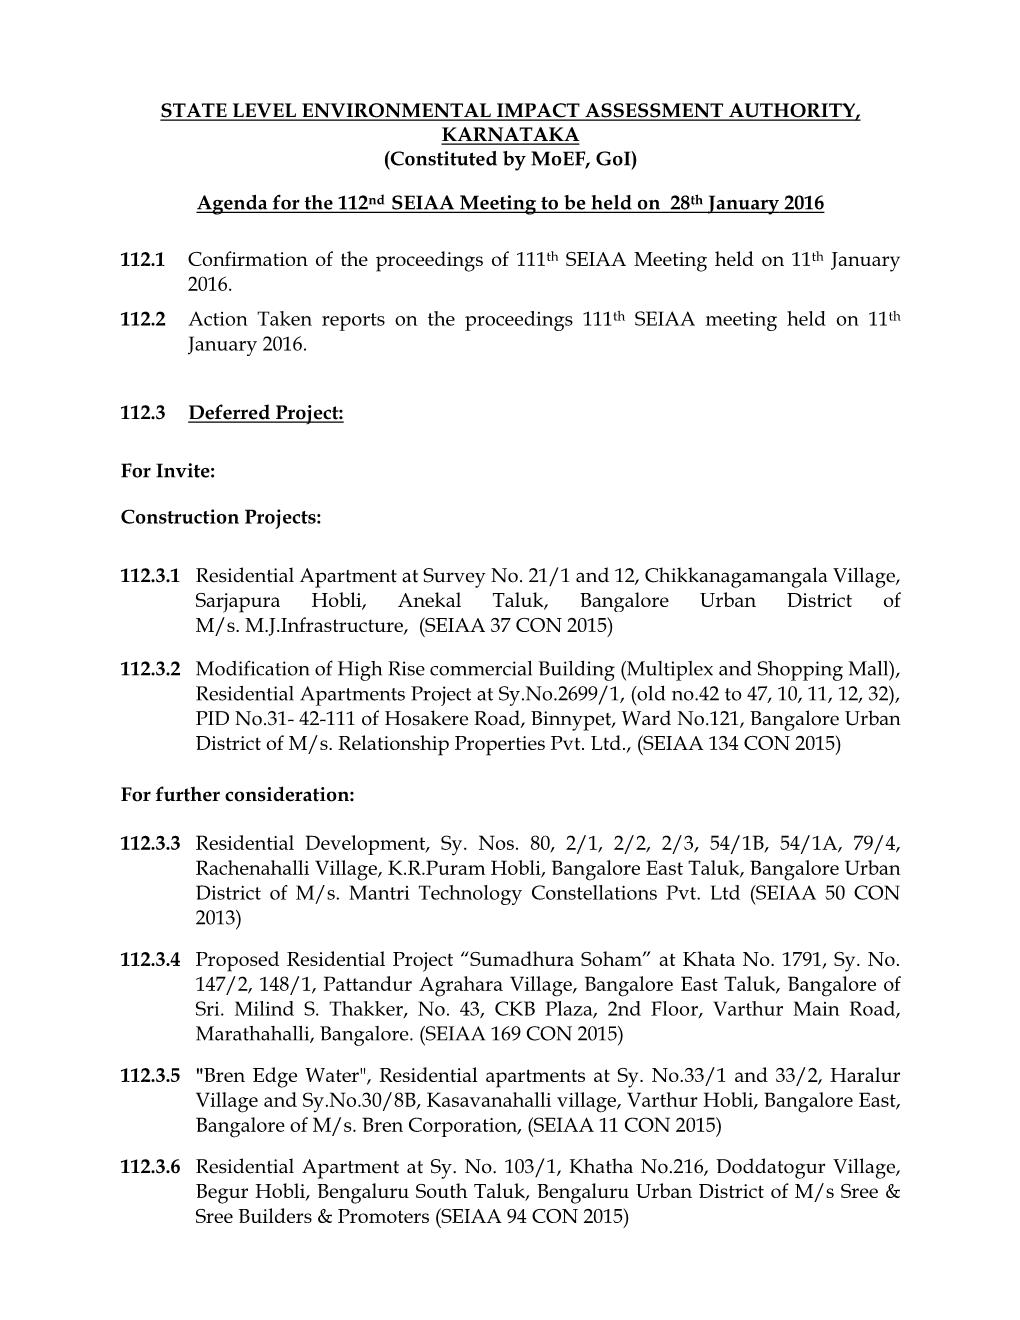 Agenda for the 112Nd SEIAA Meeting to Be Held on 28 Th January 2016